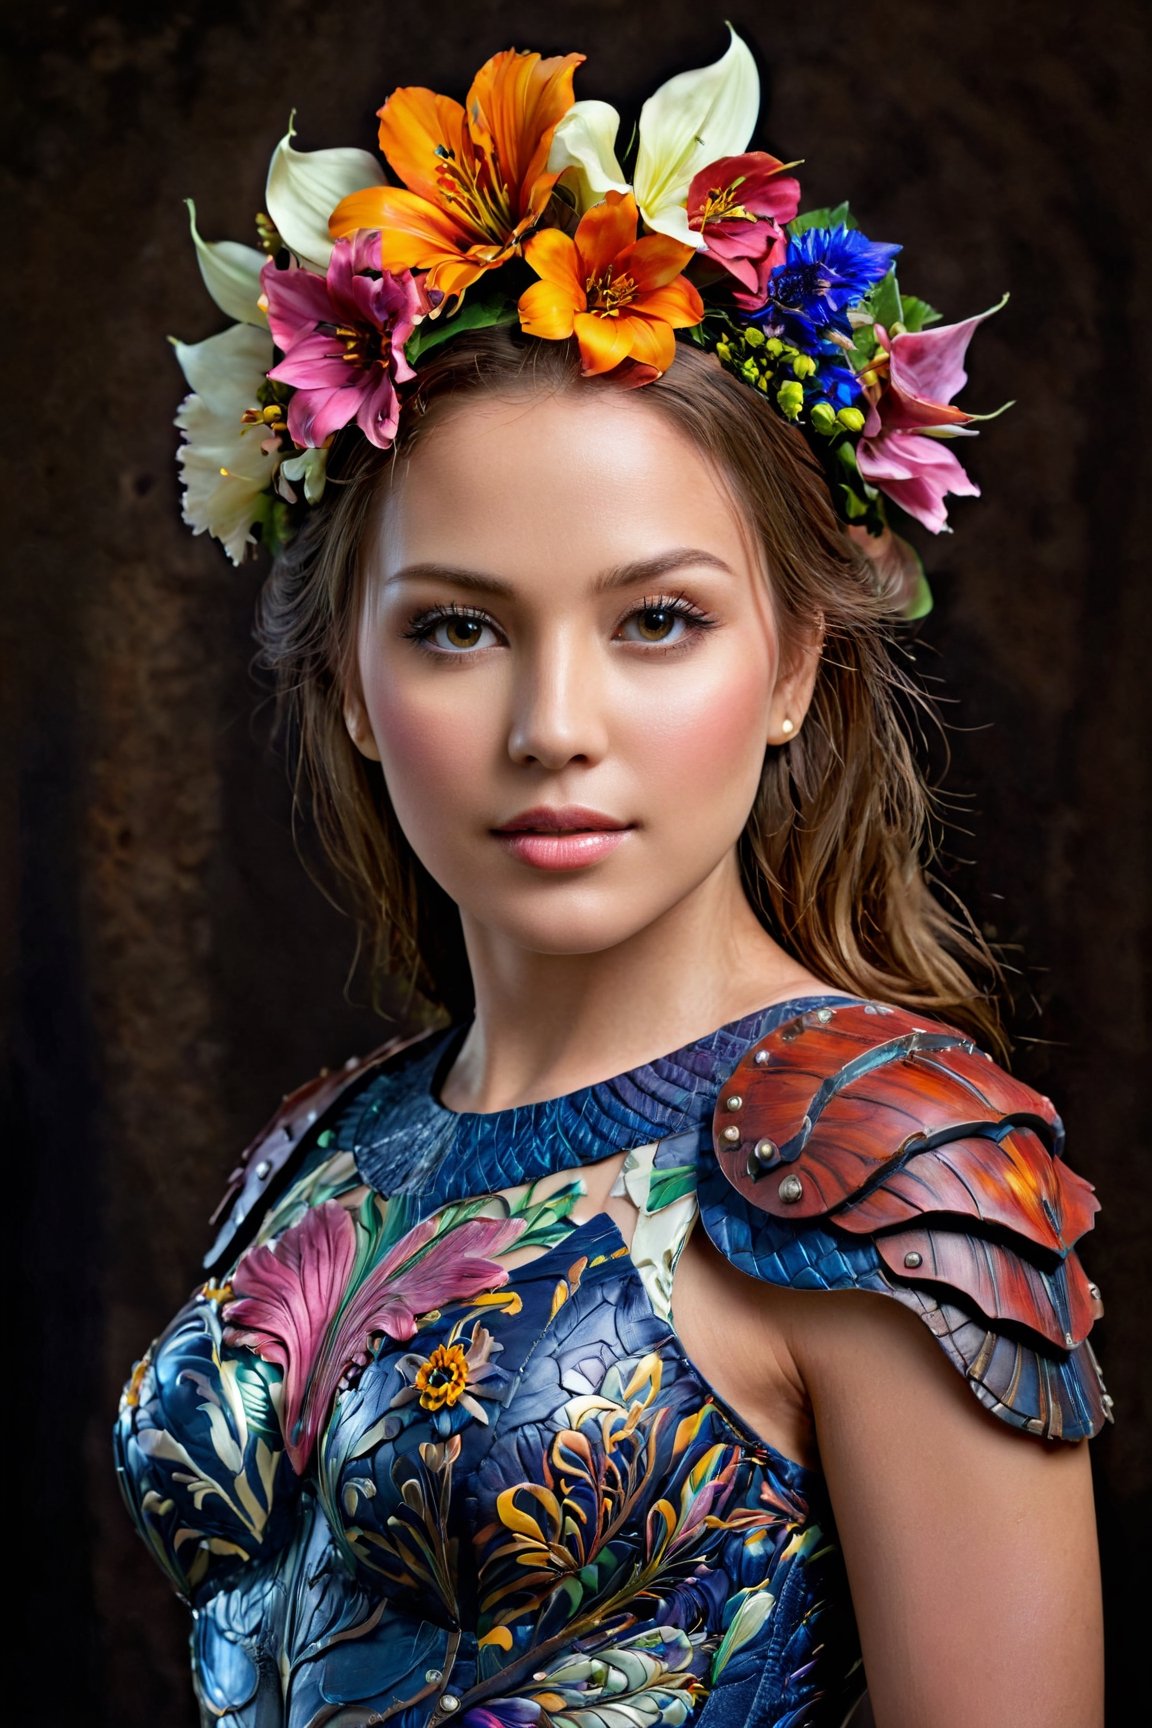 (best quality, realistic, high-resolution), colorful portrait of a woman with flawless anatomy. She is wearing a stunning flower dress that compliments her vibrant personality. Her skin is extremely detailed and realistic, with a natural and lifelike texture. The background is dark, which creates a striking contrast to the colorful flowers adorning her armor. The flowers on her armor represent her strength and beauty. The lighting accentuates the contours of her face, adding depth and dimension to the portrait. The overall composition is masterfully done, showcasing the intricate details and achieving a high level of realism.,Realistic